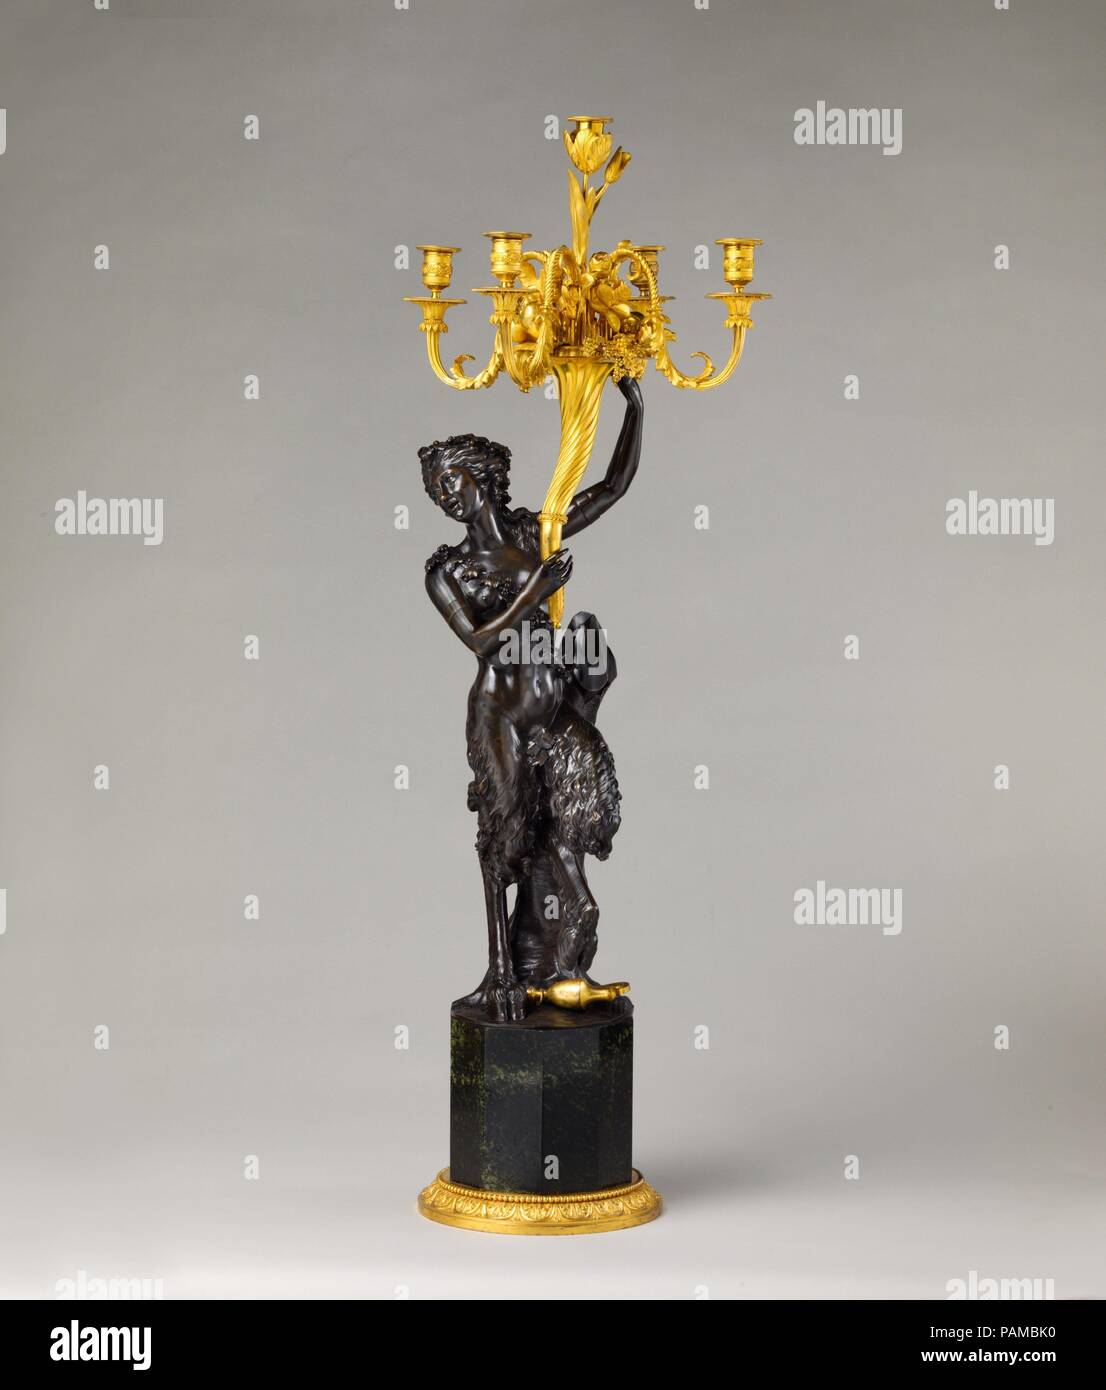 Five-light candelabrum (one of a pair). Culture: French. Dimensions: H. 45 3/8 x W. 16 7/8 x D. 14 1/4in. (115.3 x 42.9 x 36.2cm). Modeler: derives from a model by Clodion (Claude Michel) (French, Nancy 1738-1814 Paris). Date: ca. 1785. Museum: Metropolitan Museum of Art, New York, USA. Stock Photo